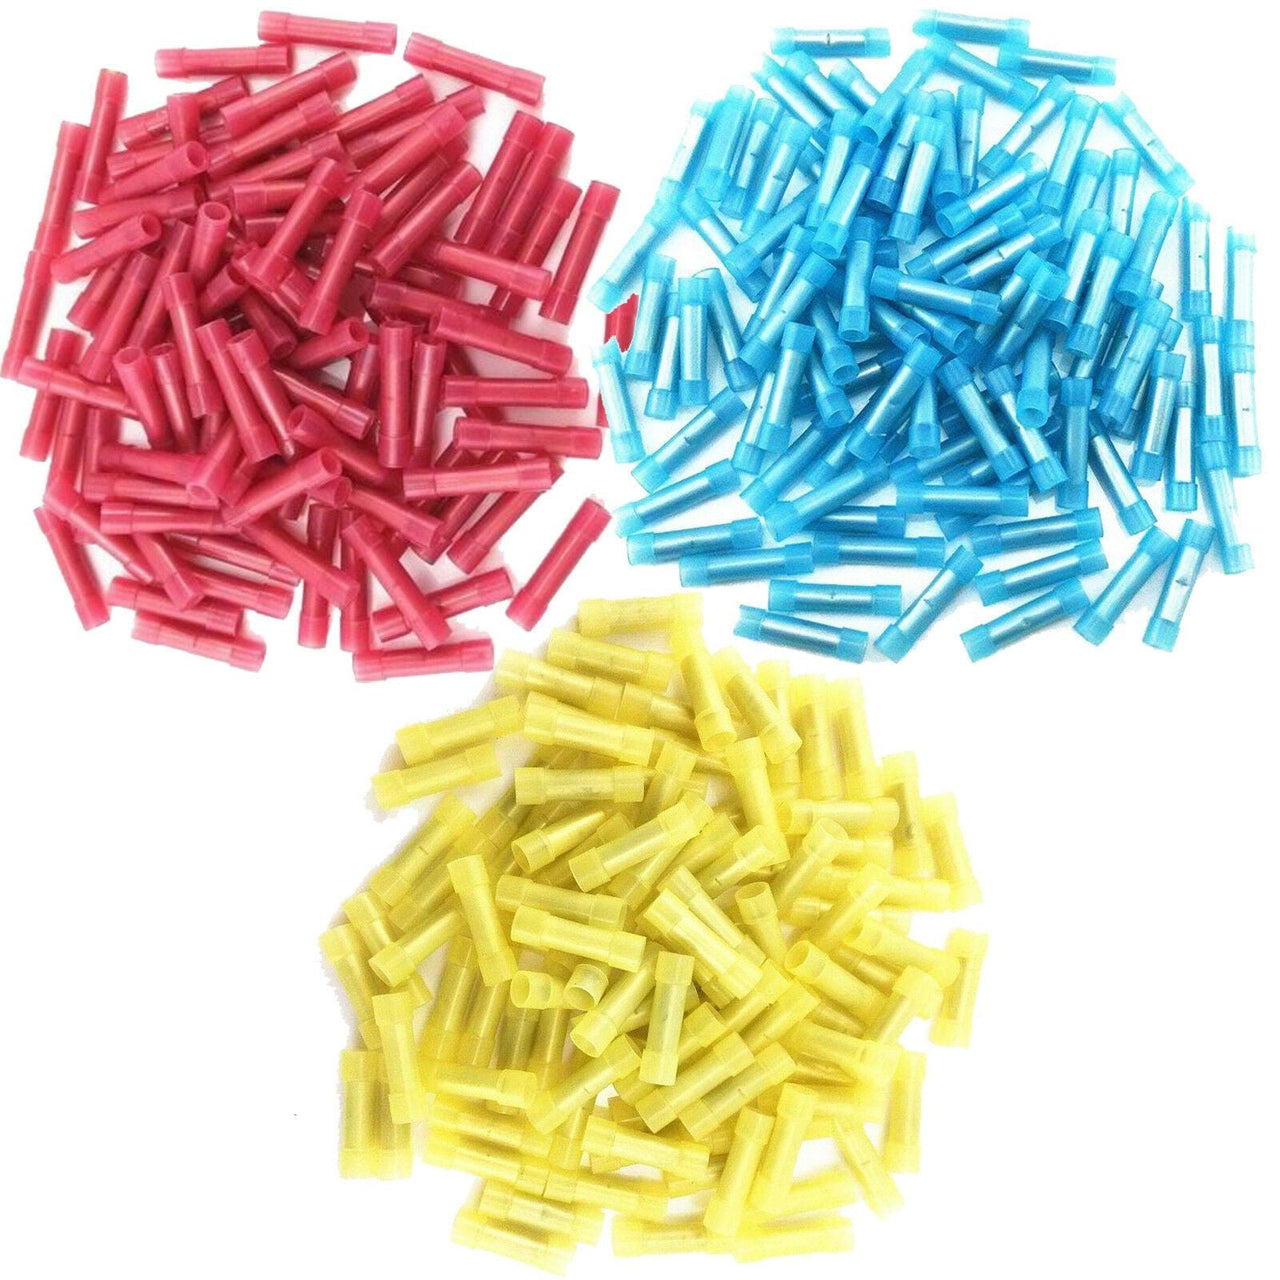 300 Red Blue Yellow Nylon Butt Connector 22-18 16-14 12-10 AWG Gauge Insulated